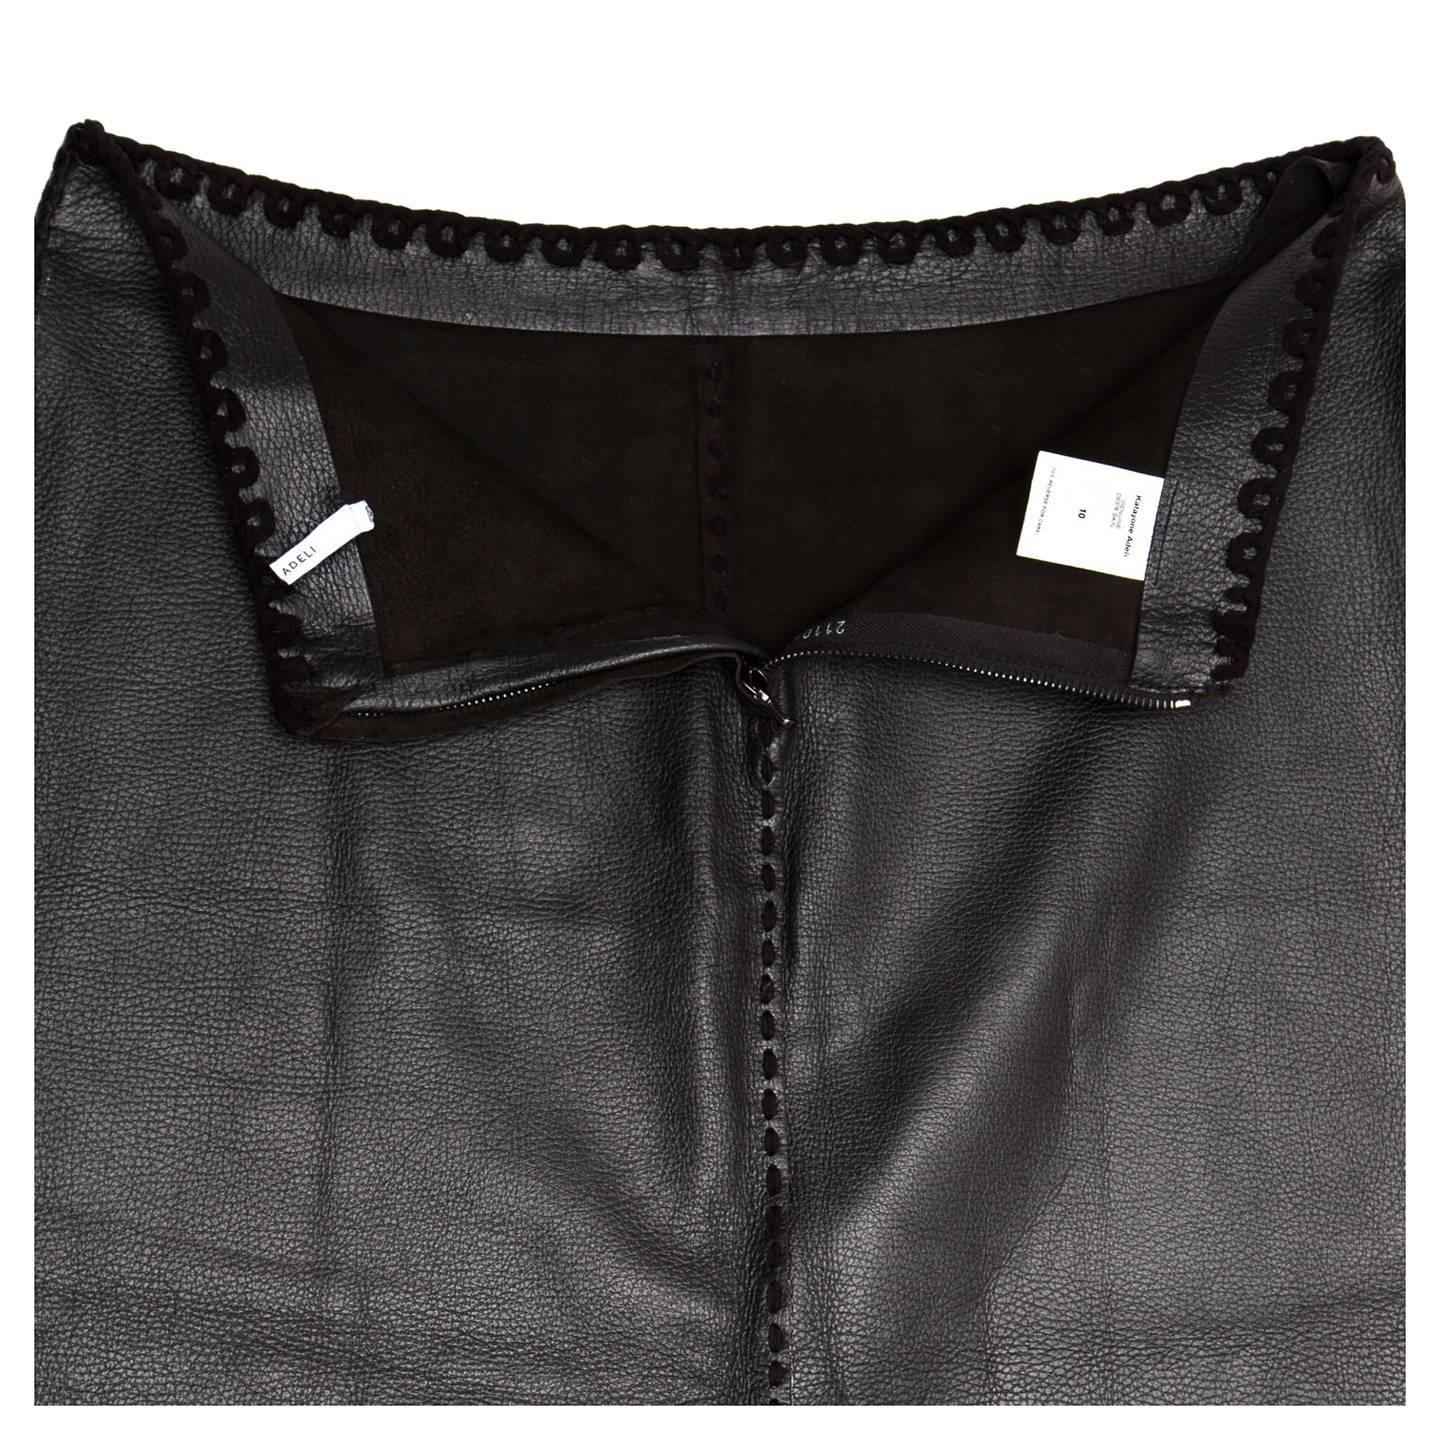 Katayone Adeli Black leather Skirt In Excellent Condition For Sale In Brooklyn, NY